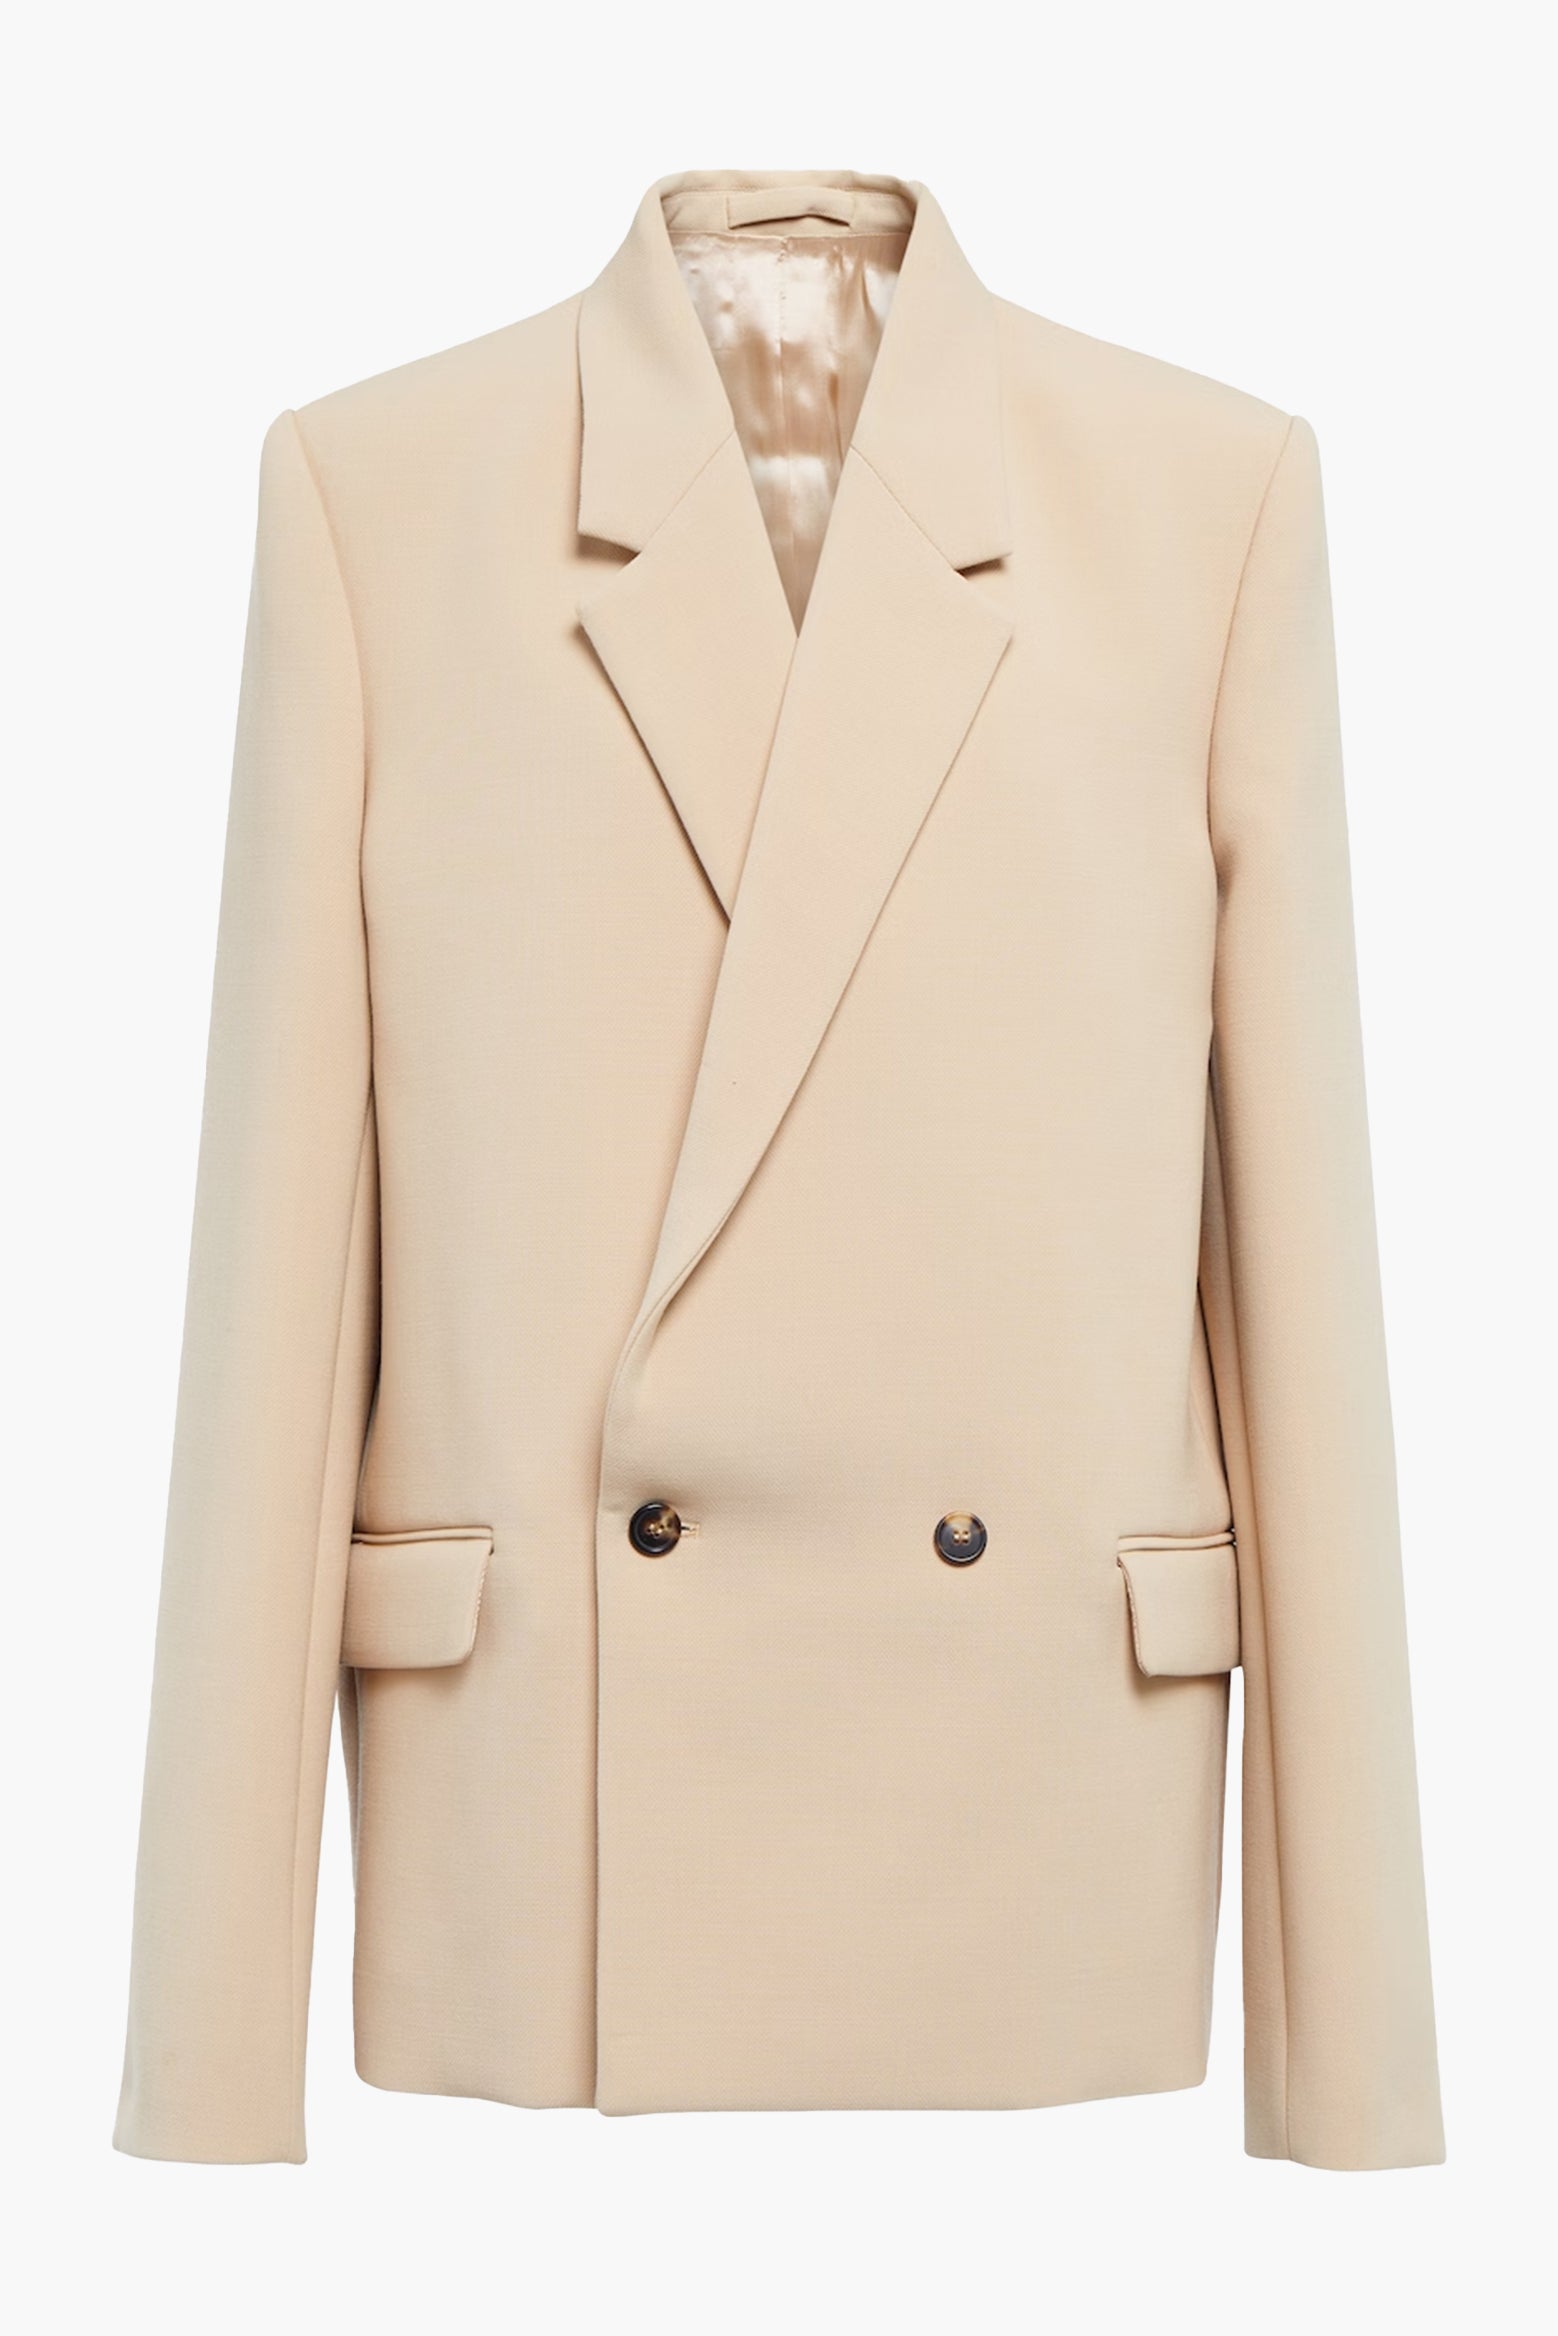 The Wardrobe NYC HB Blazer in Biscuit available at The New Trend Australia